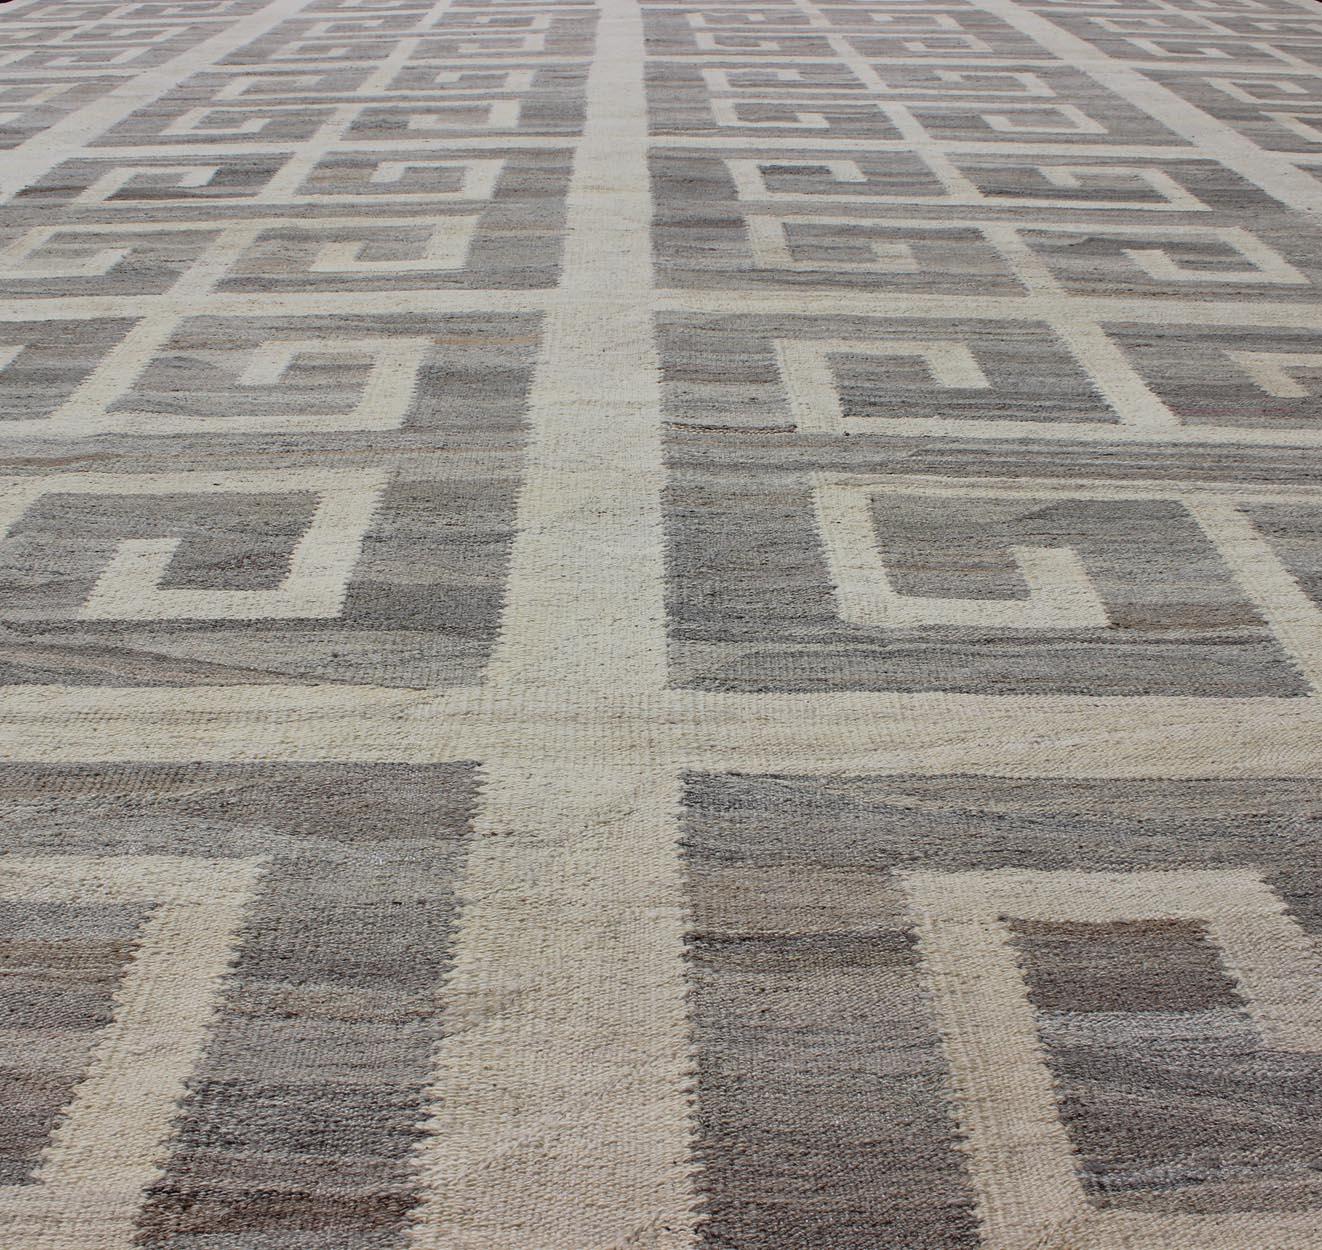 Oversized Modern Kilim with Large Scale Greek Key Design in Cream & Gray Tones For Sale 1